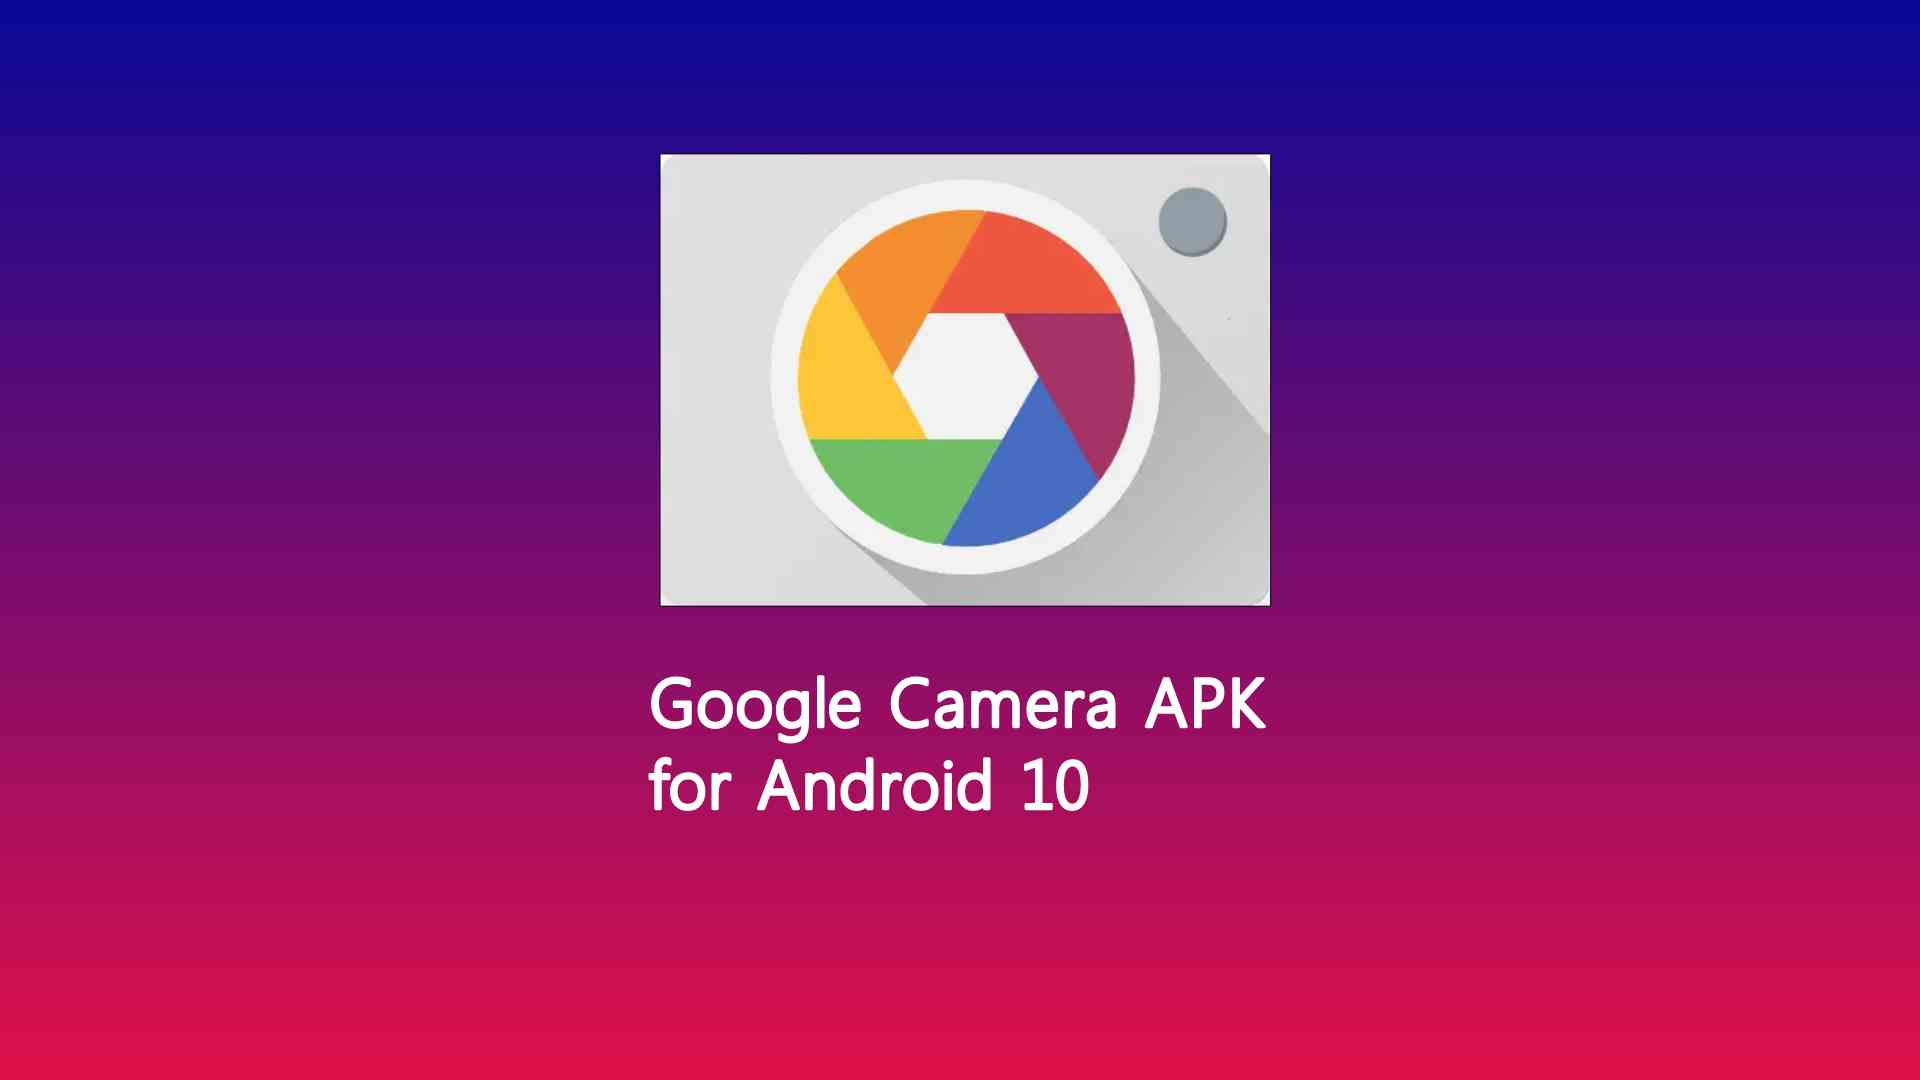 Google Camera APK for Android 10